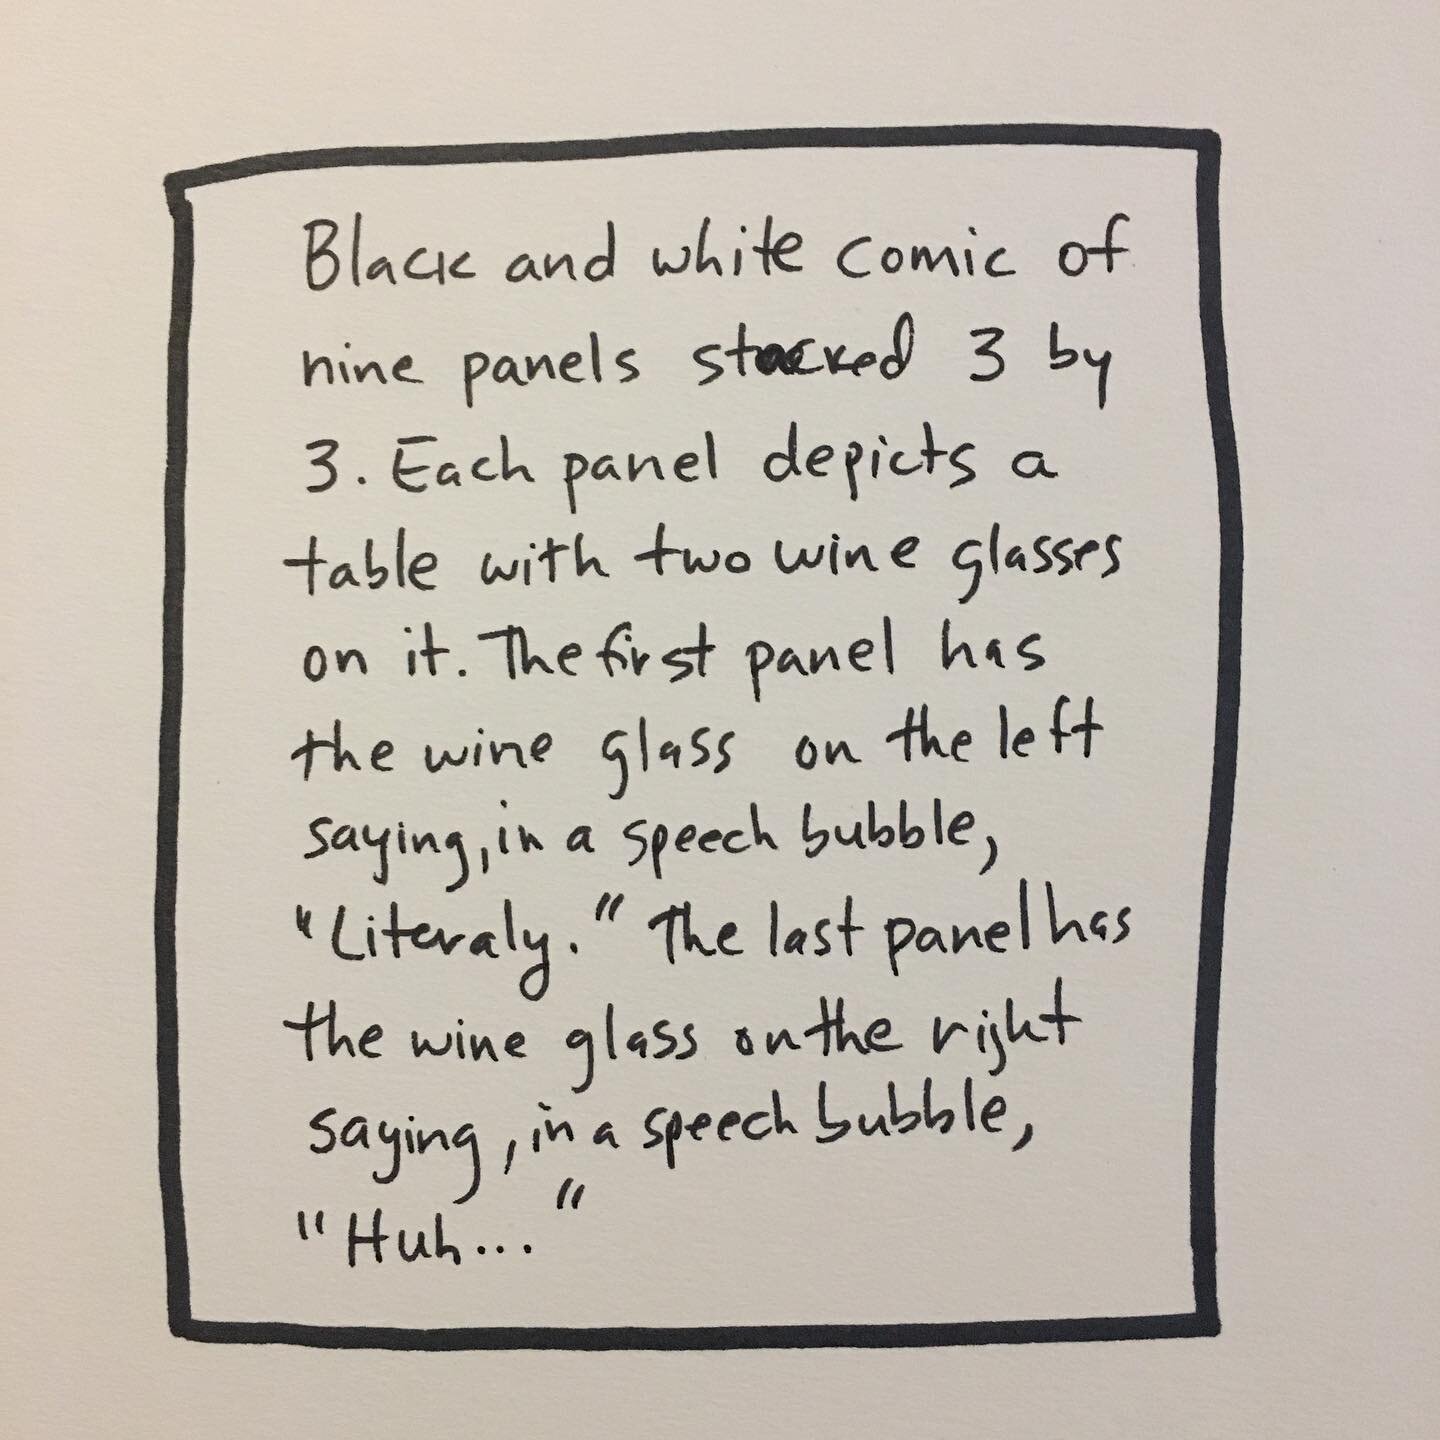 First image ID: The first image is a black and white drawing of a box with the following printed inside it: Black and white comic of nine panels stacked 3 by 3. Each panel depicts a table with two wine glasses on it. The first panel has the wine glas